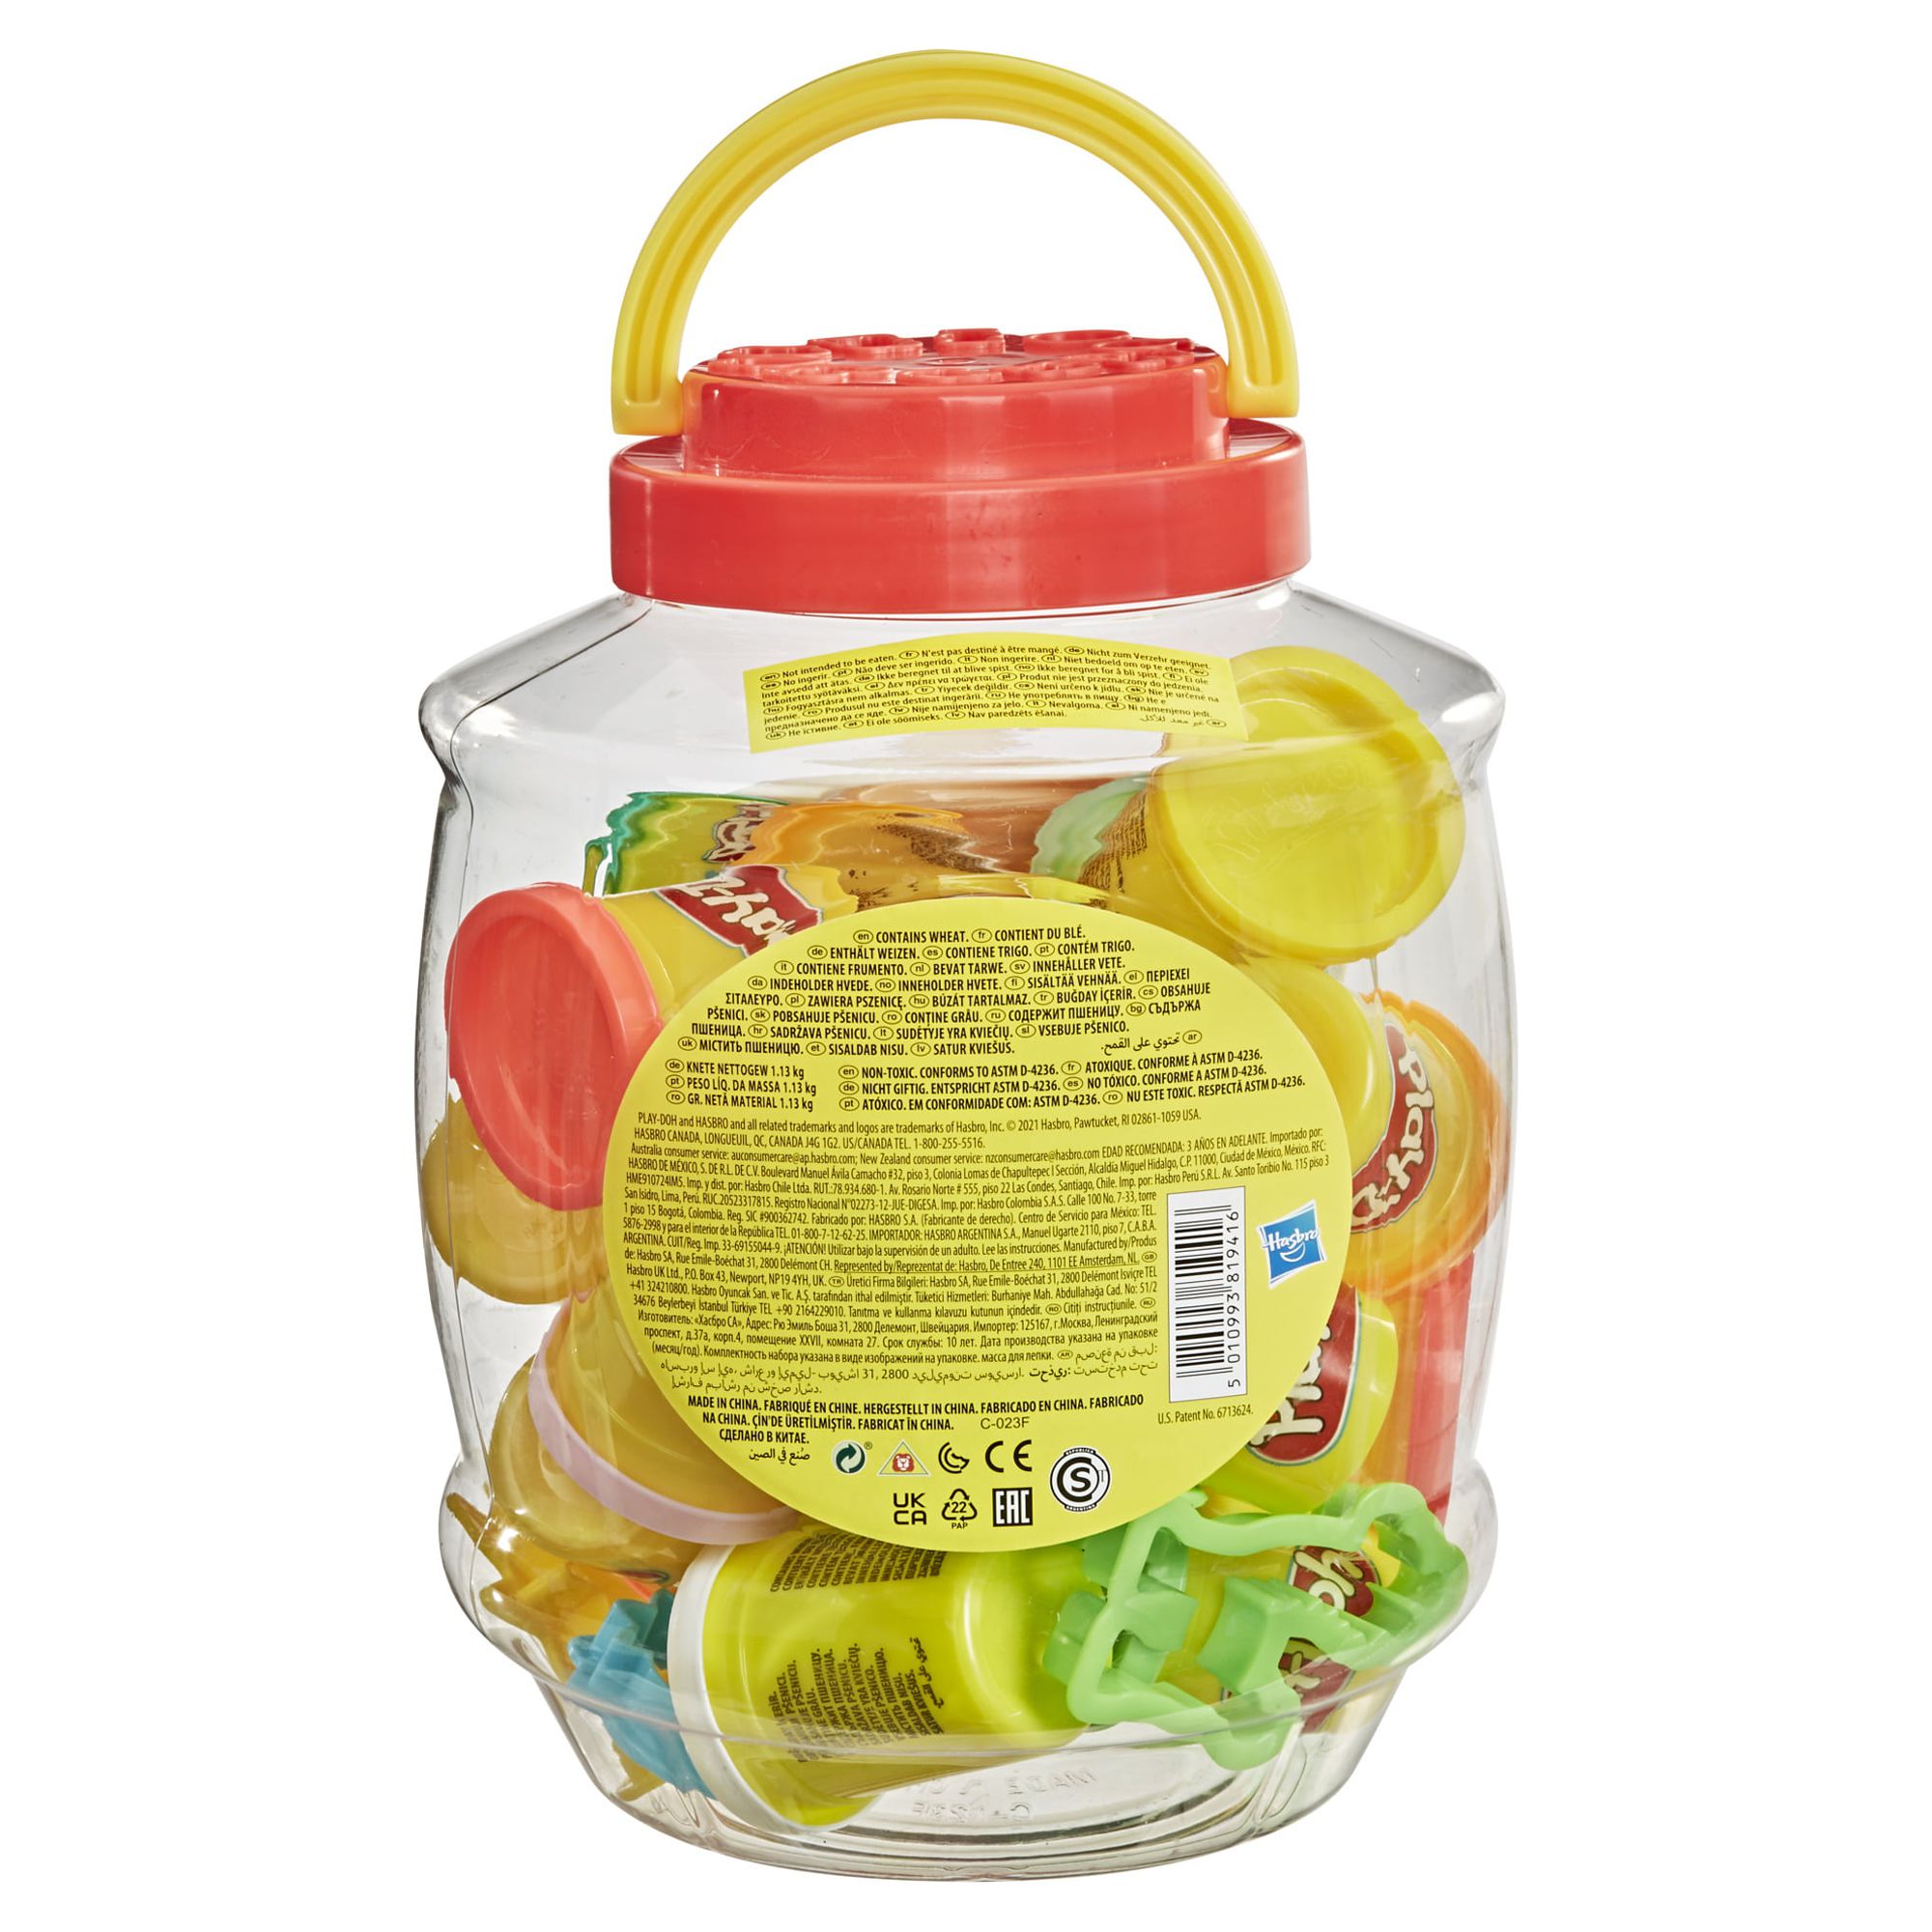 Play-Doh Bucket of Fun Play Dough Set - 20 Colors (20 Piece), Only At Walmart - image 3 of 8